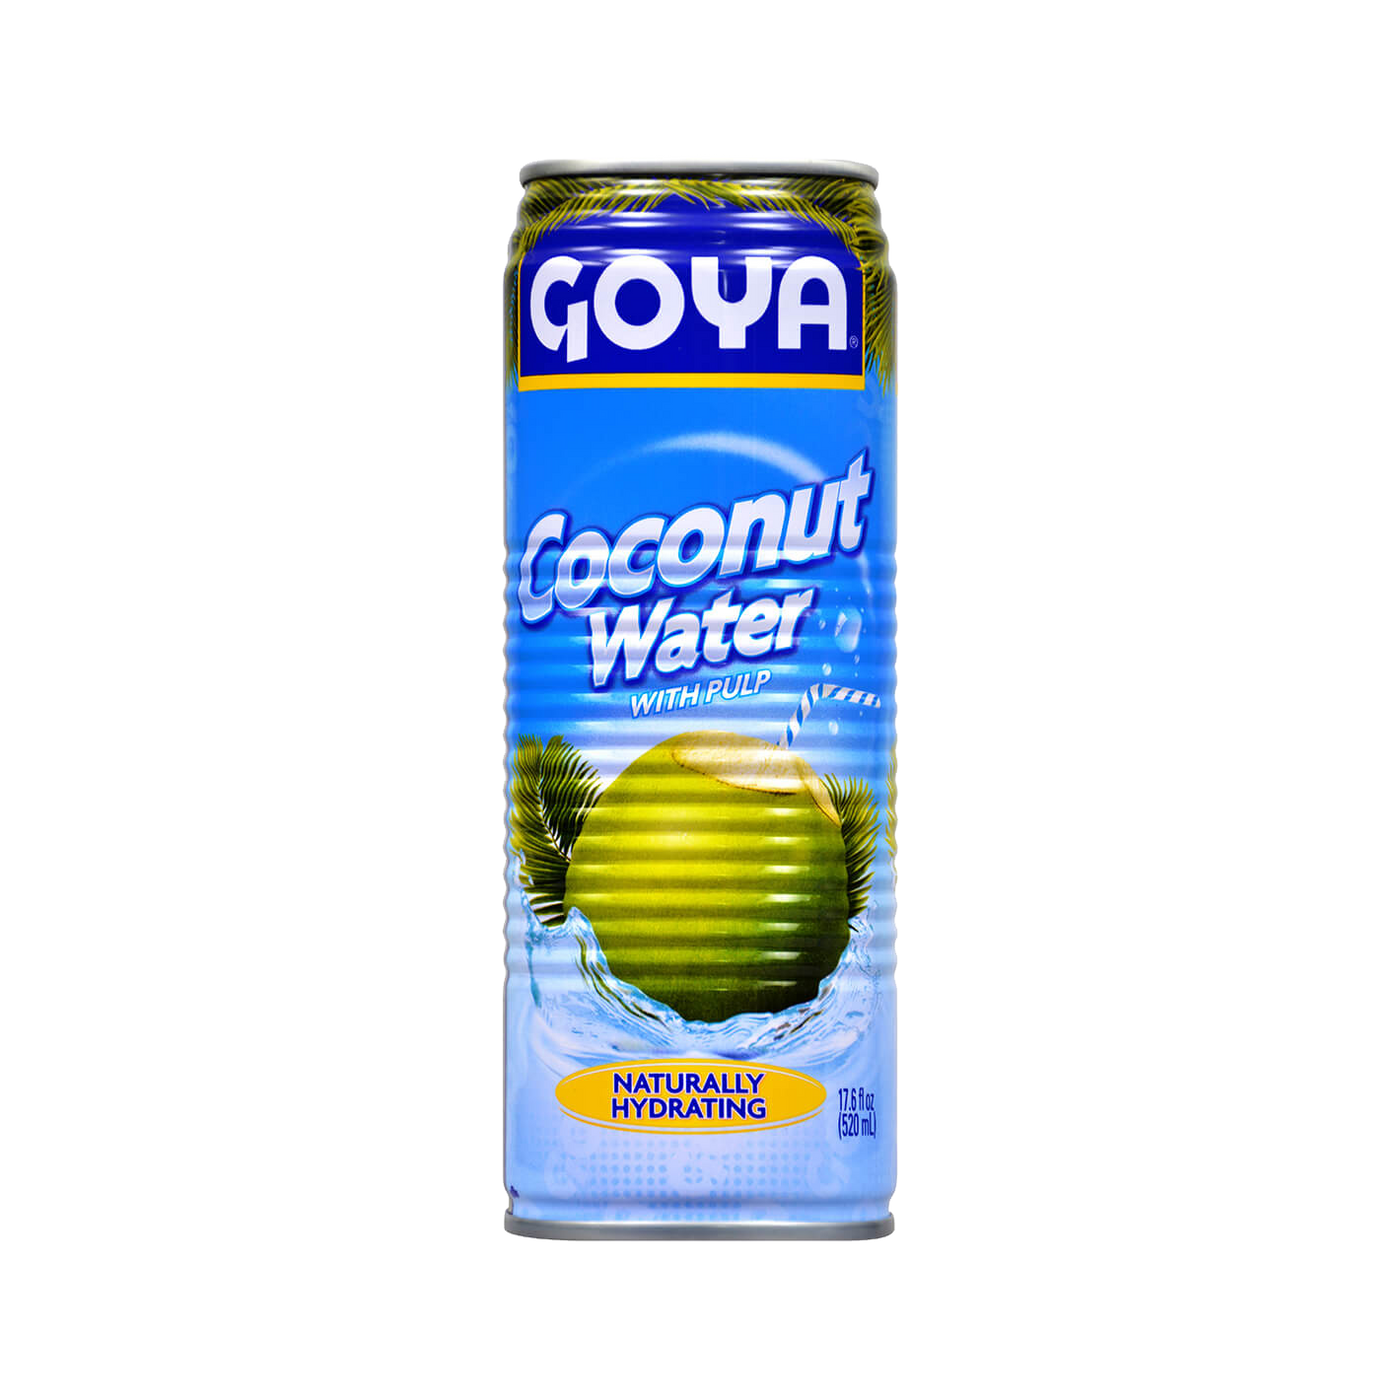   Goya Coconut Water With Pulp